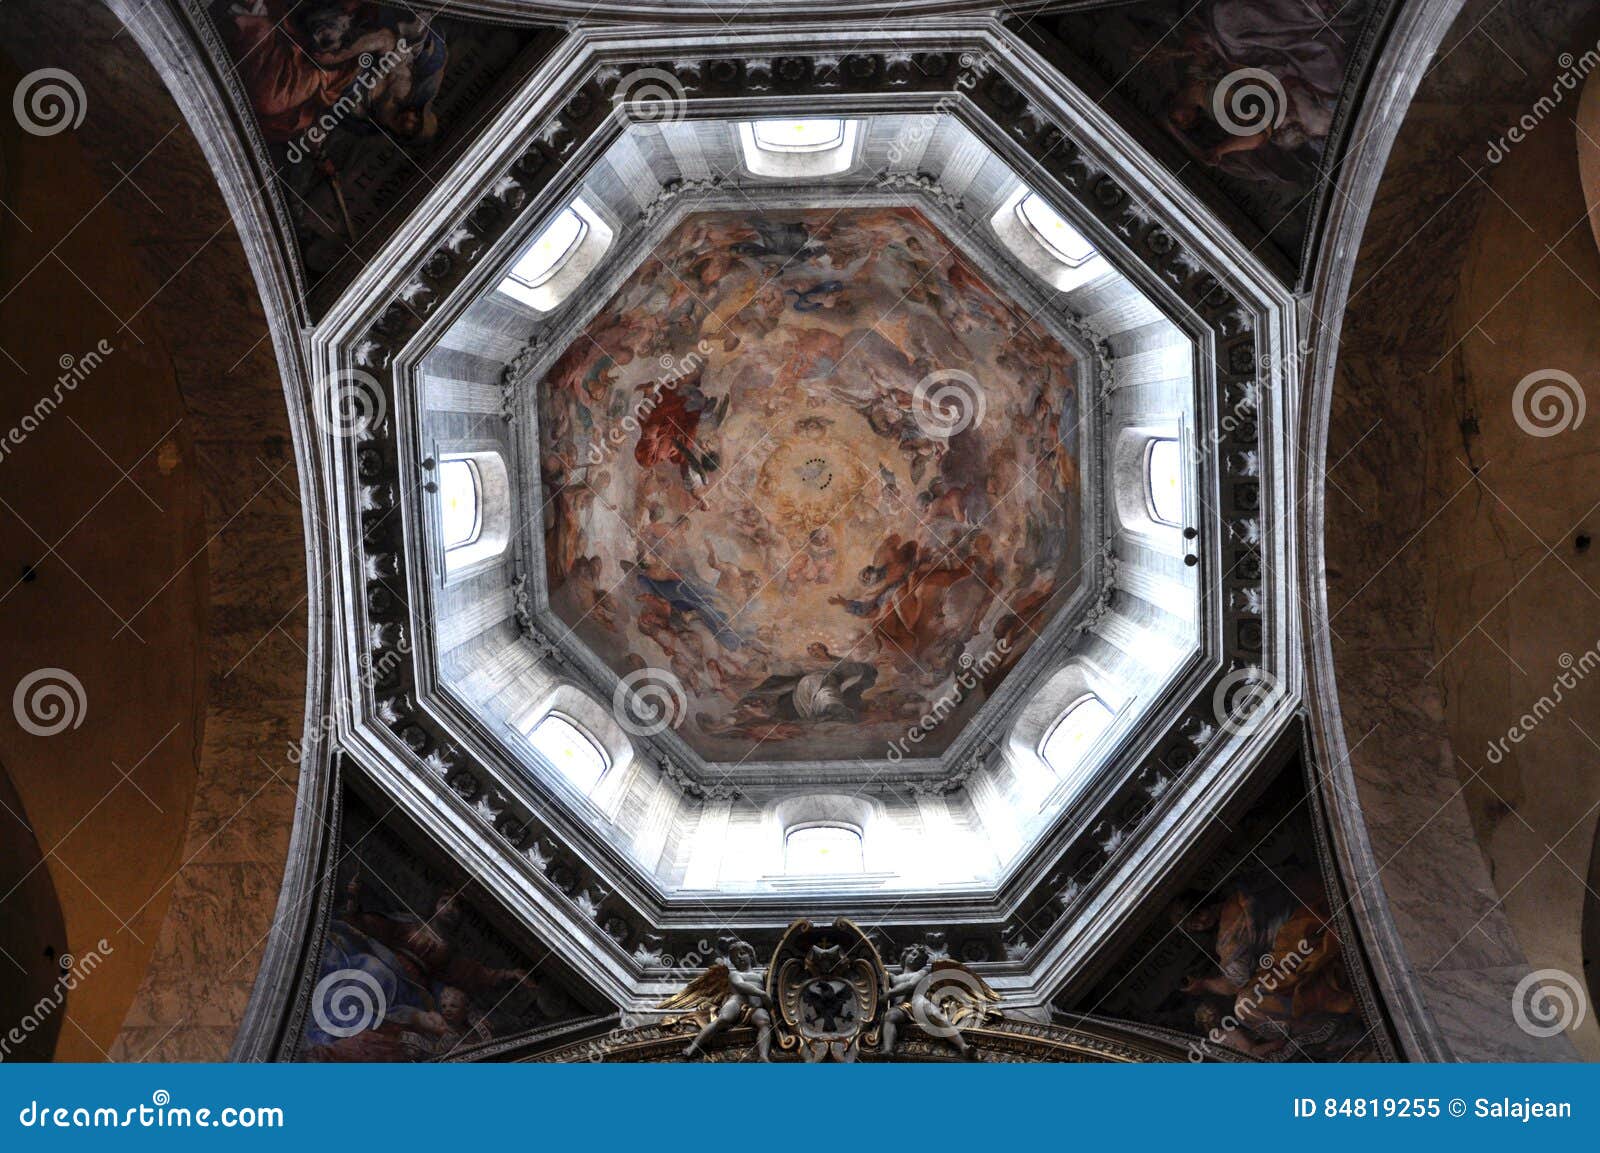 Painted Ceiling Of The Dome Of Santa Maria Del Popolo